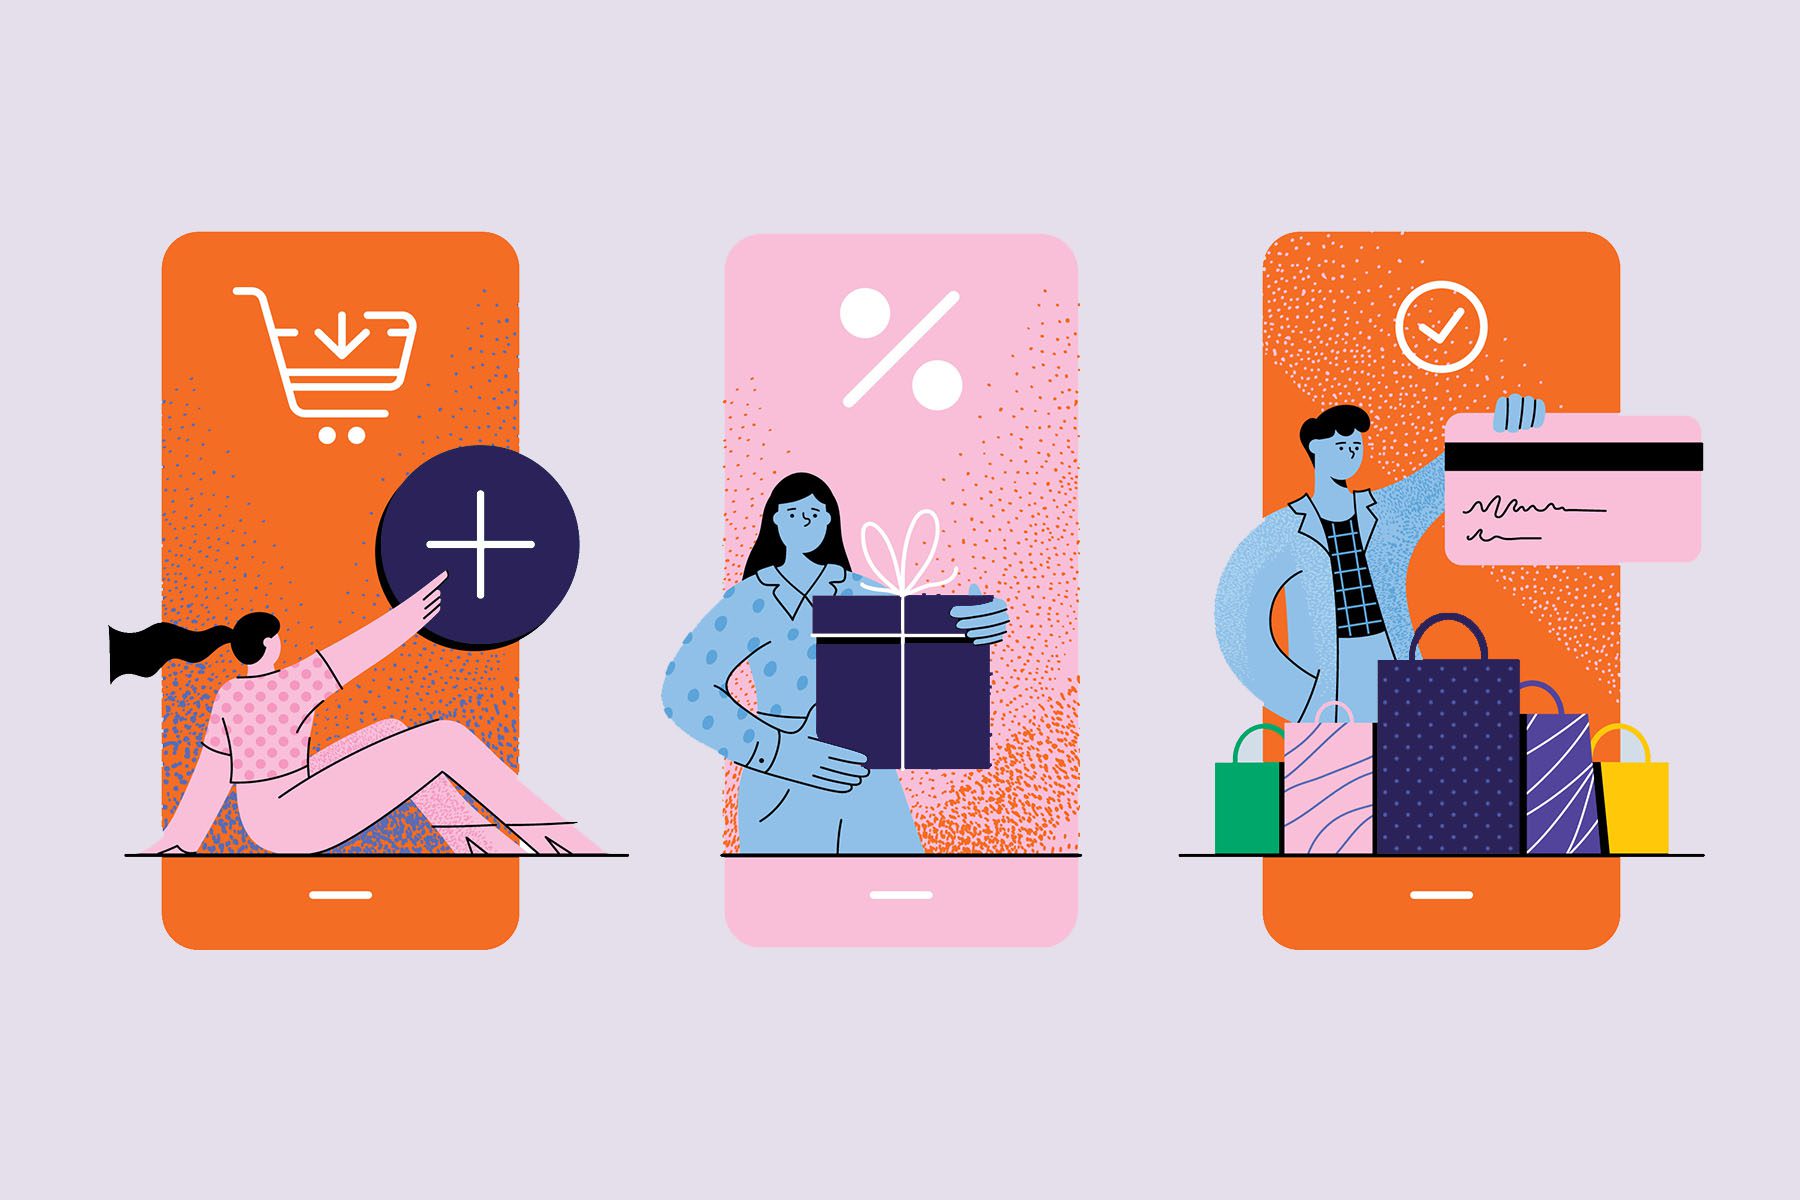 Illustration of person adding item to digital cart, person holding a gift and person holding a credit card, with shopping bags underneath them.